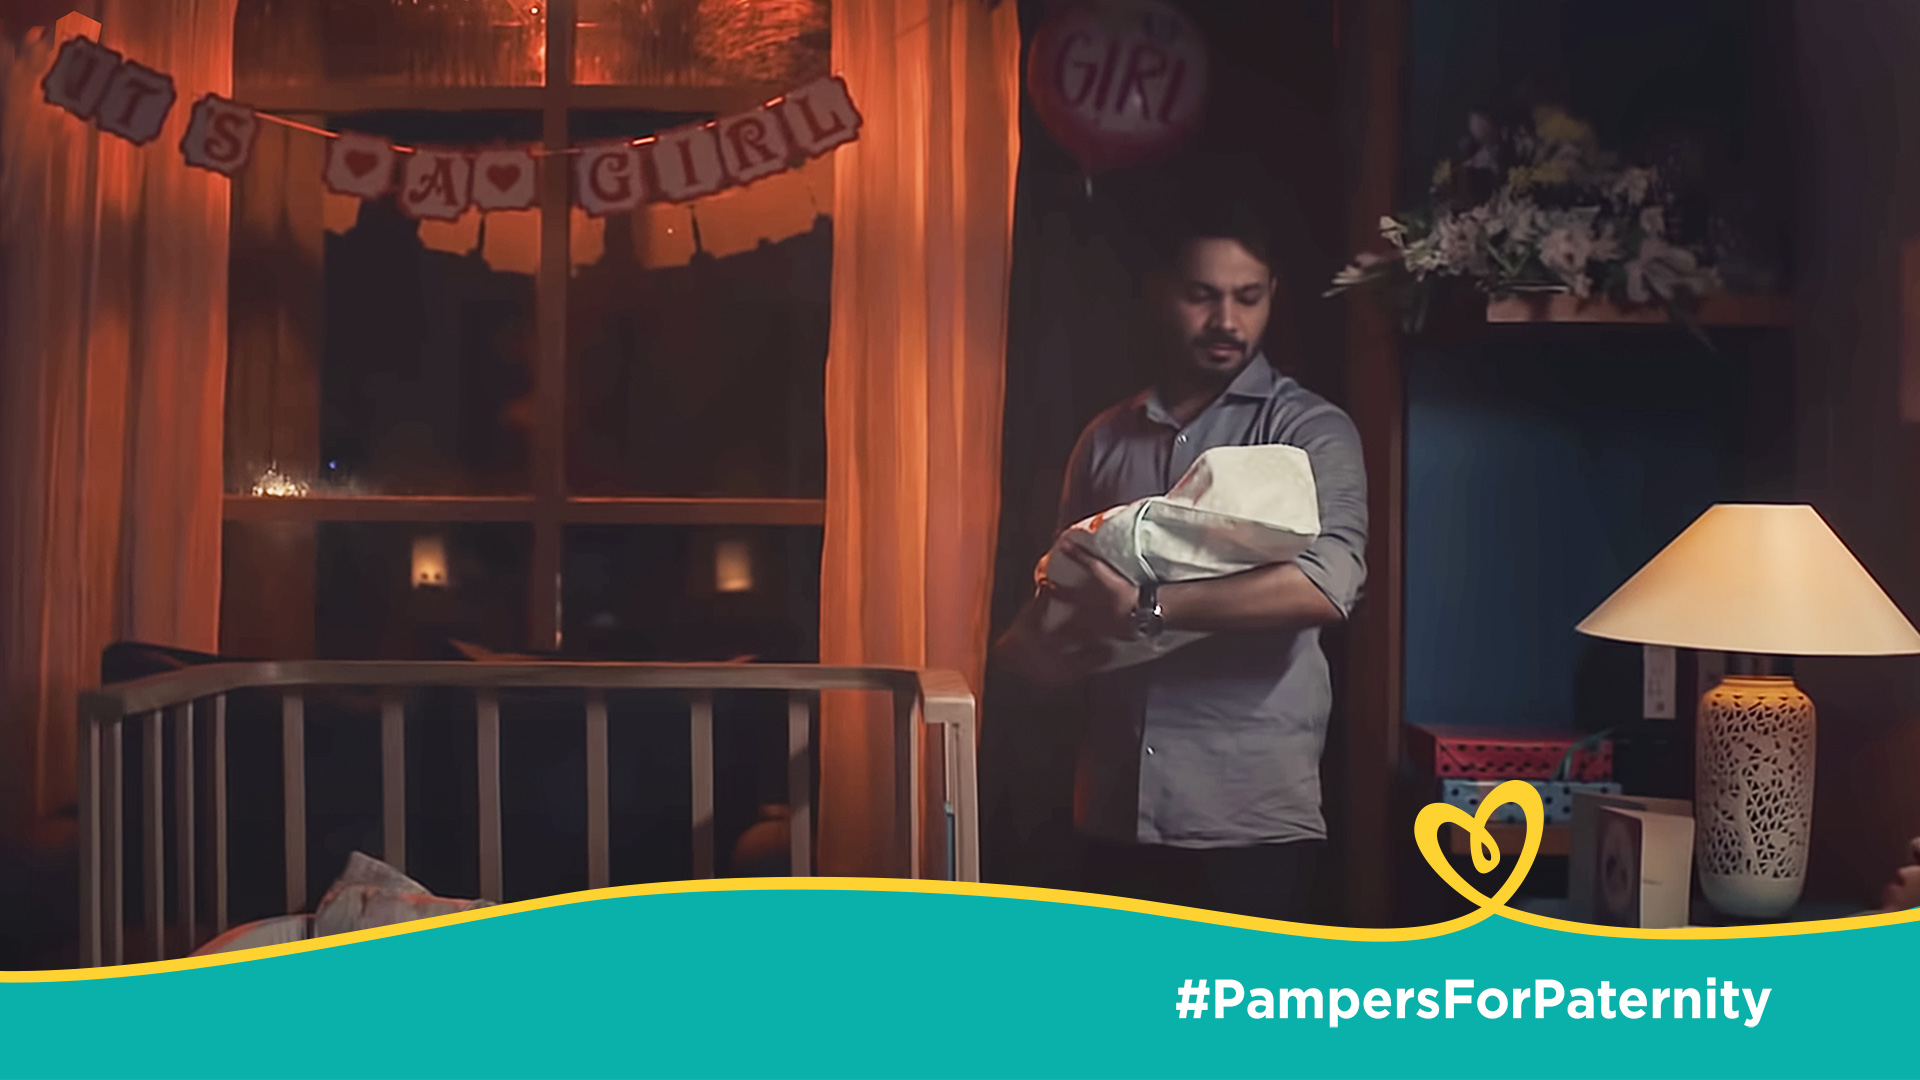 Pampers for Paternity